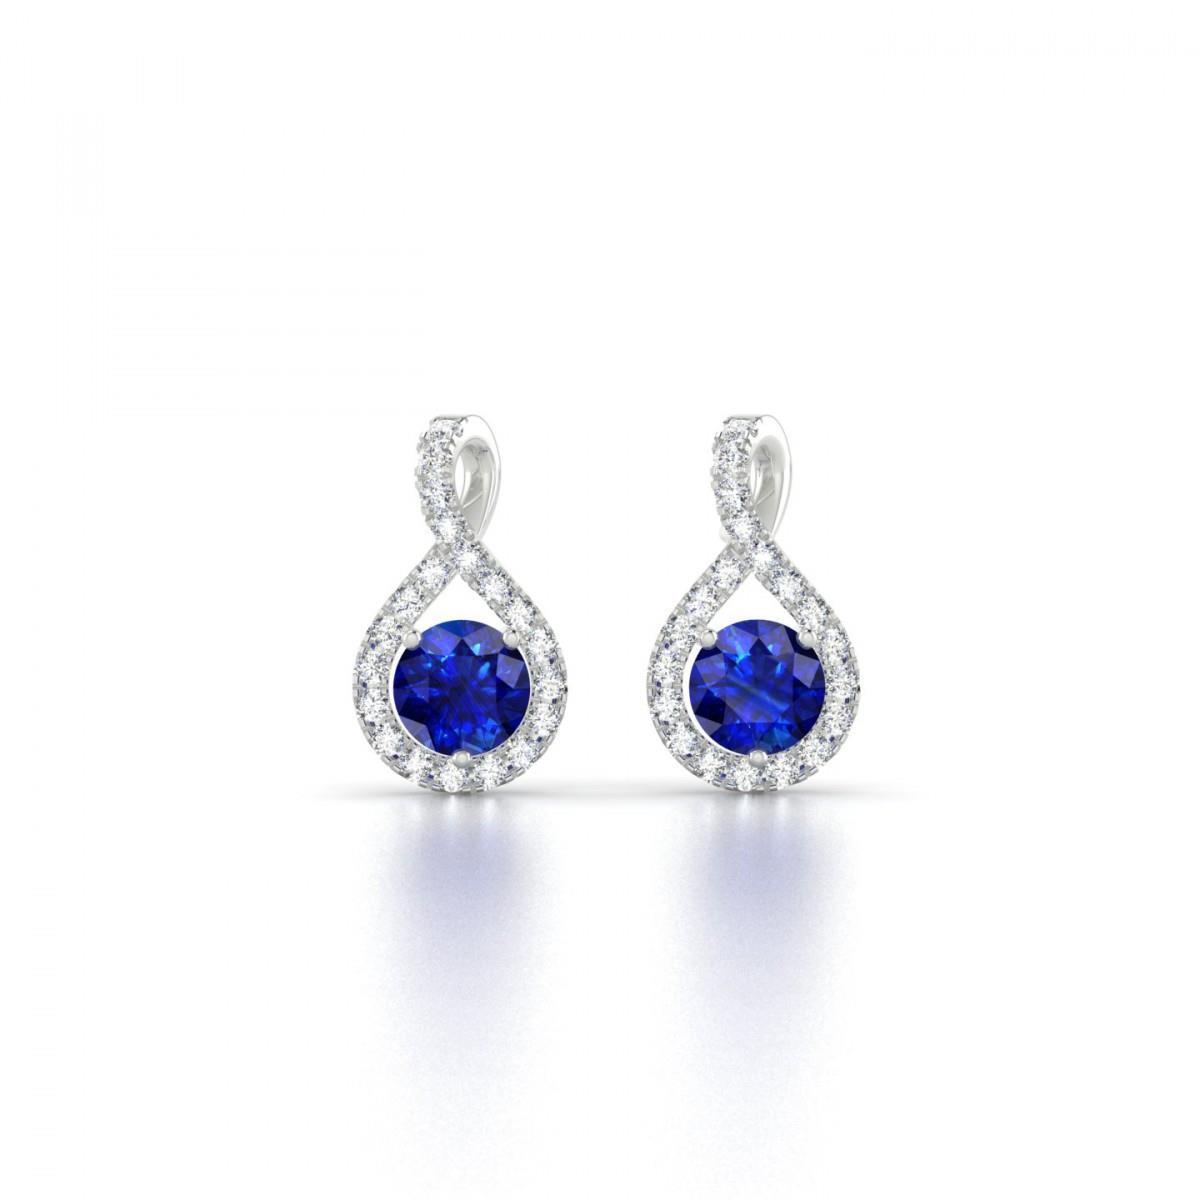 4 Carats Round Cut Sapphire And Diamonds Studs Earrings Gold 14K